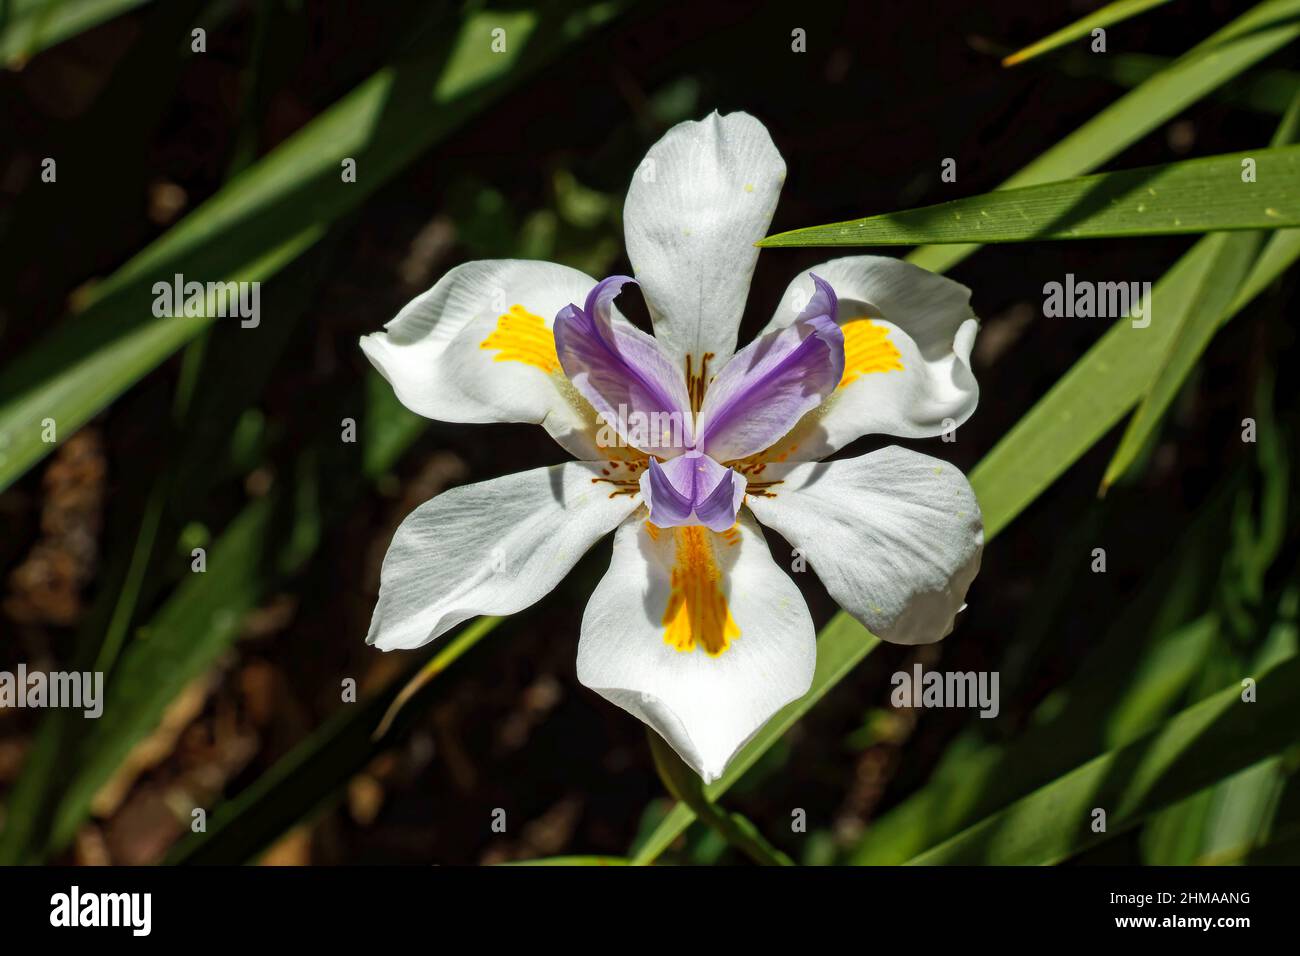 cultivated flower, close-up, 6 white petals, gold, purple center petals, nature, Florida, Bok Tower Gardens, Florida, Lake Wales, Fl, spring Stock Photo